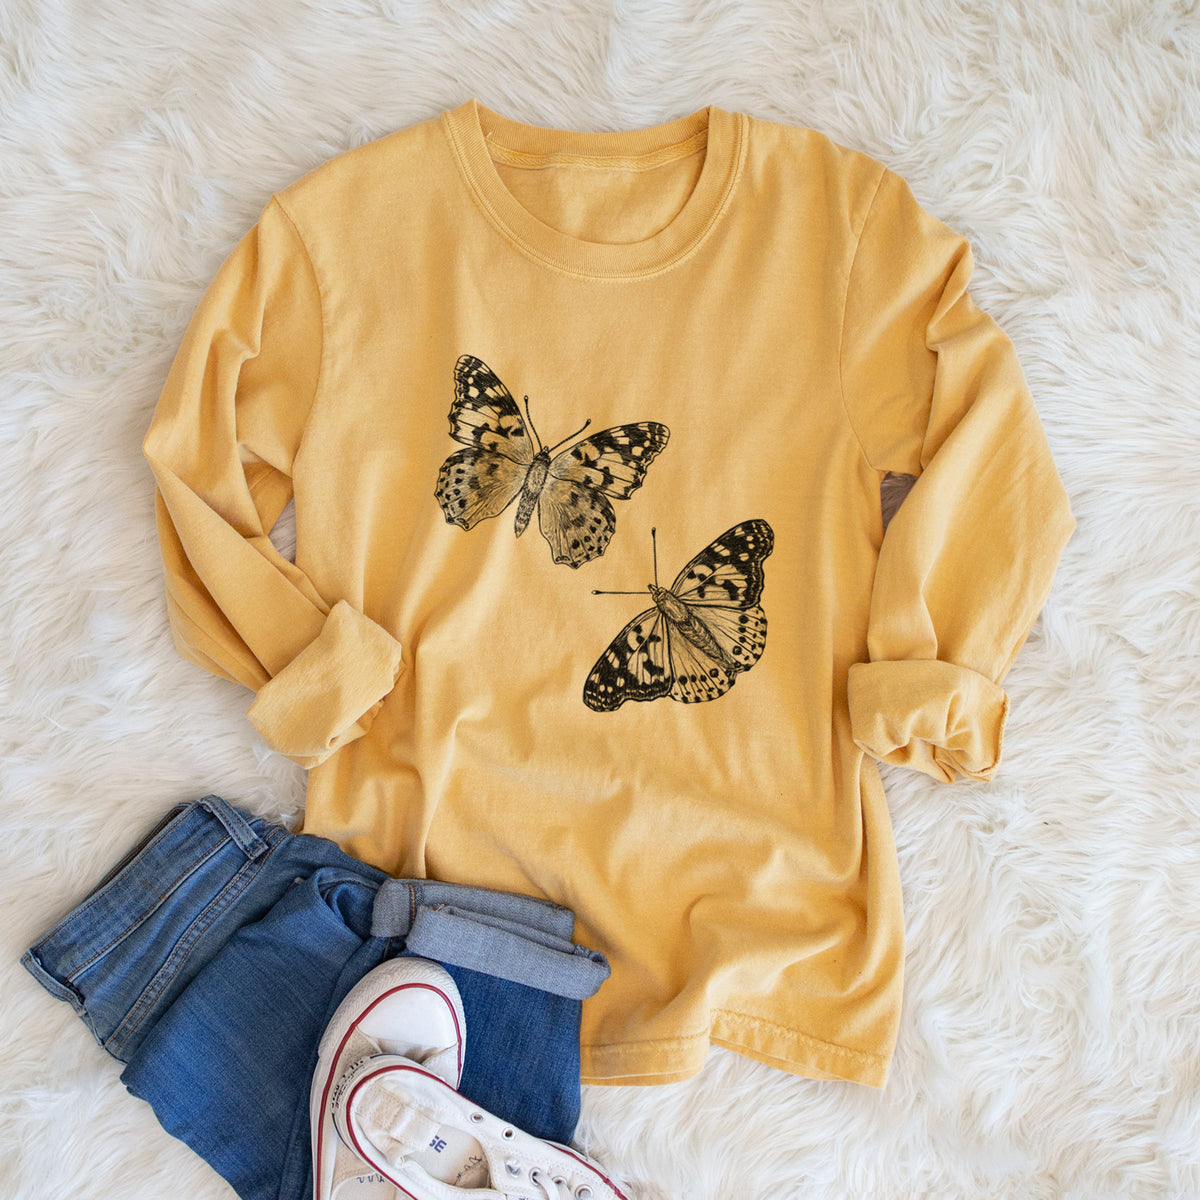 Painted Lady Butterflies - Heavyweight 100% Cotton Long Sleeve